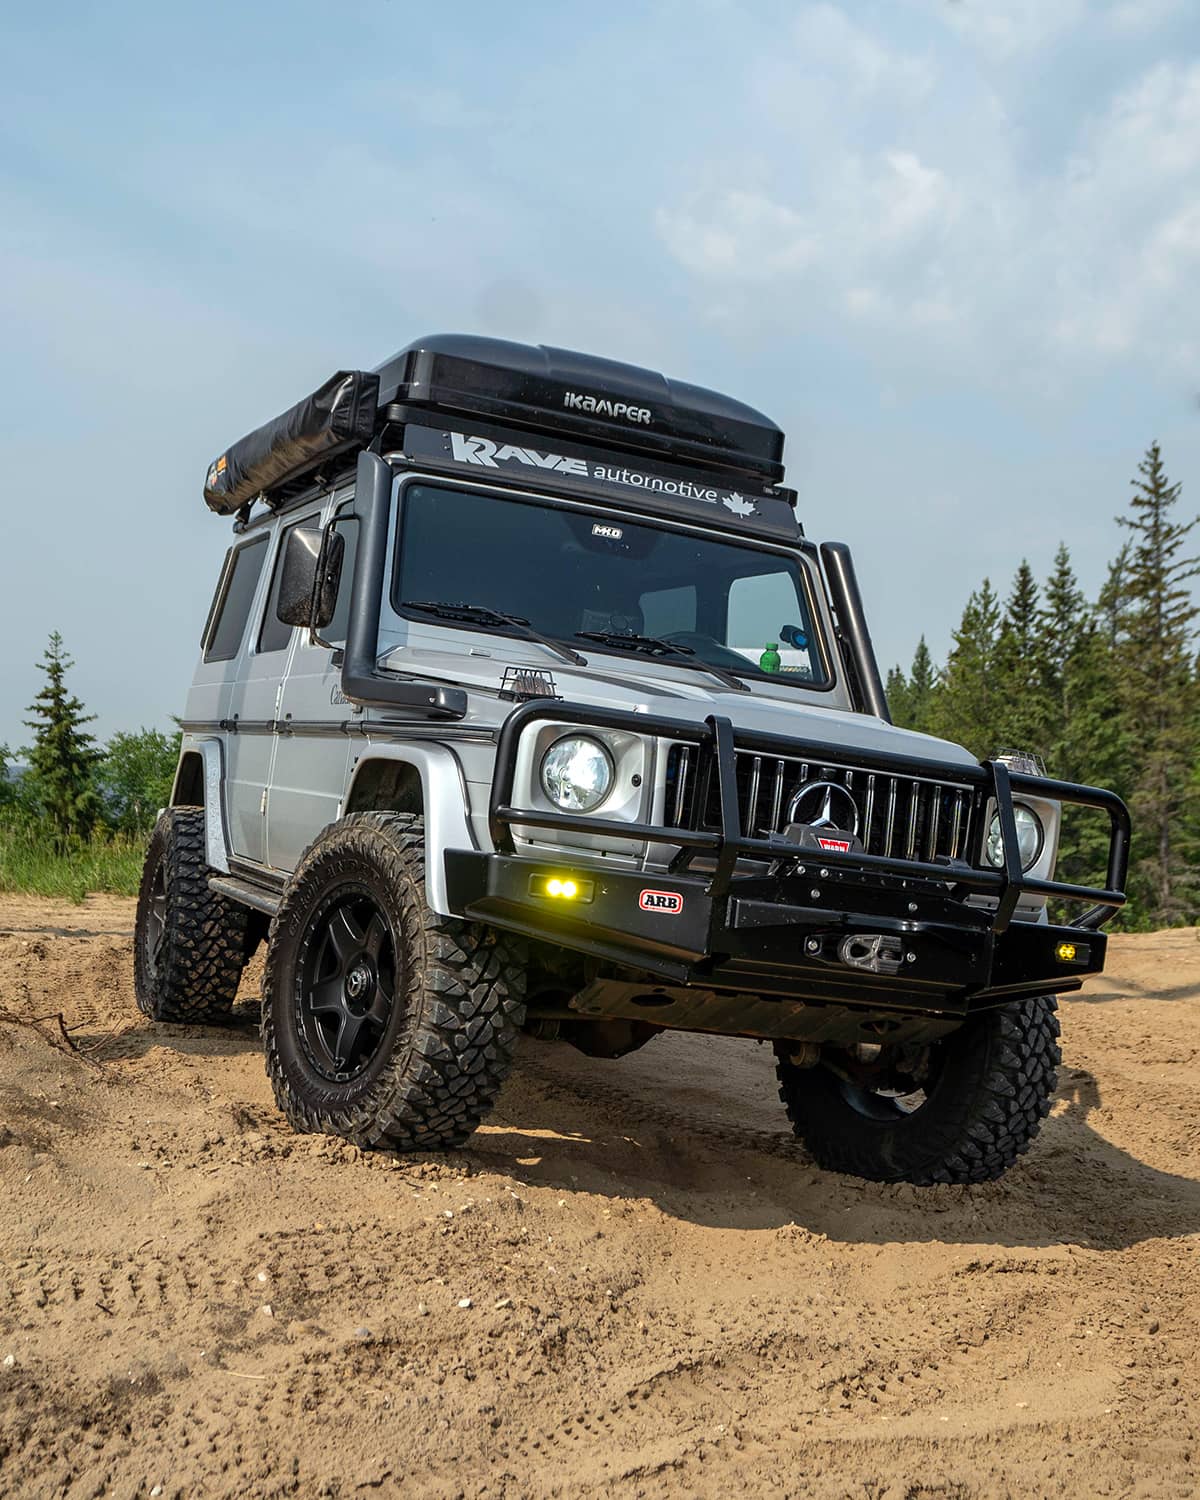 Lifted Mercedes G-Class off-road build with snorkels and off-road modifications